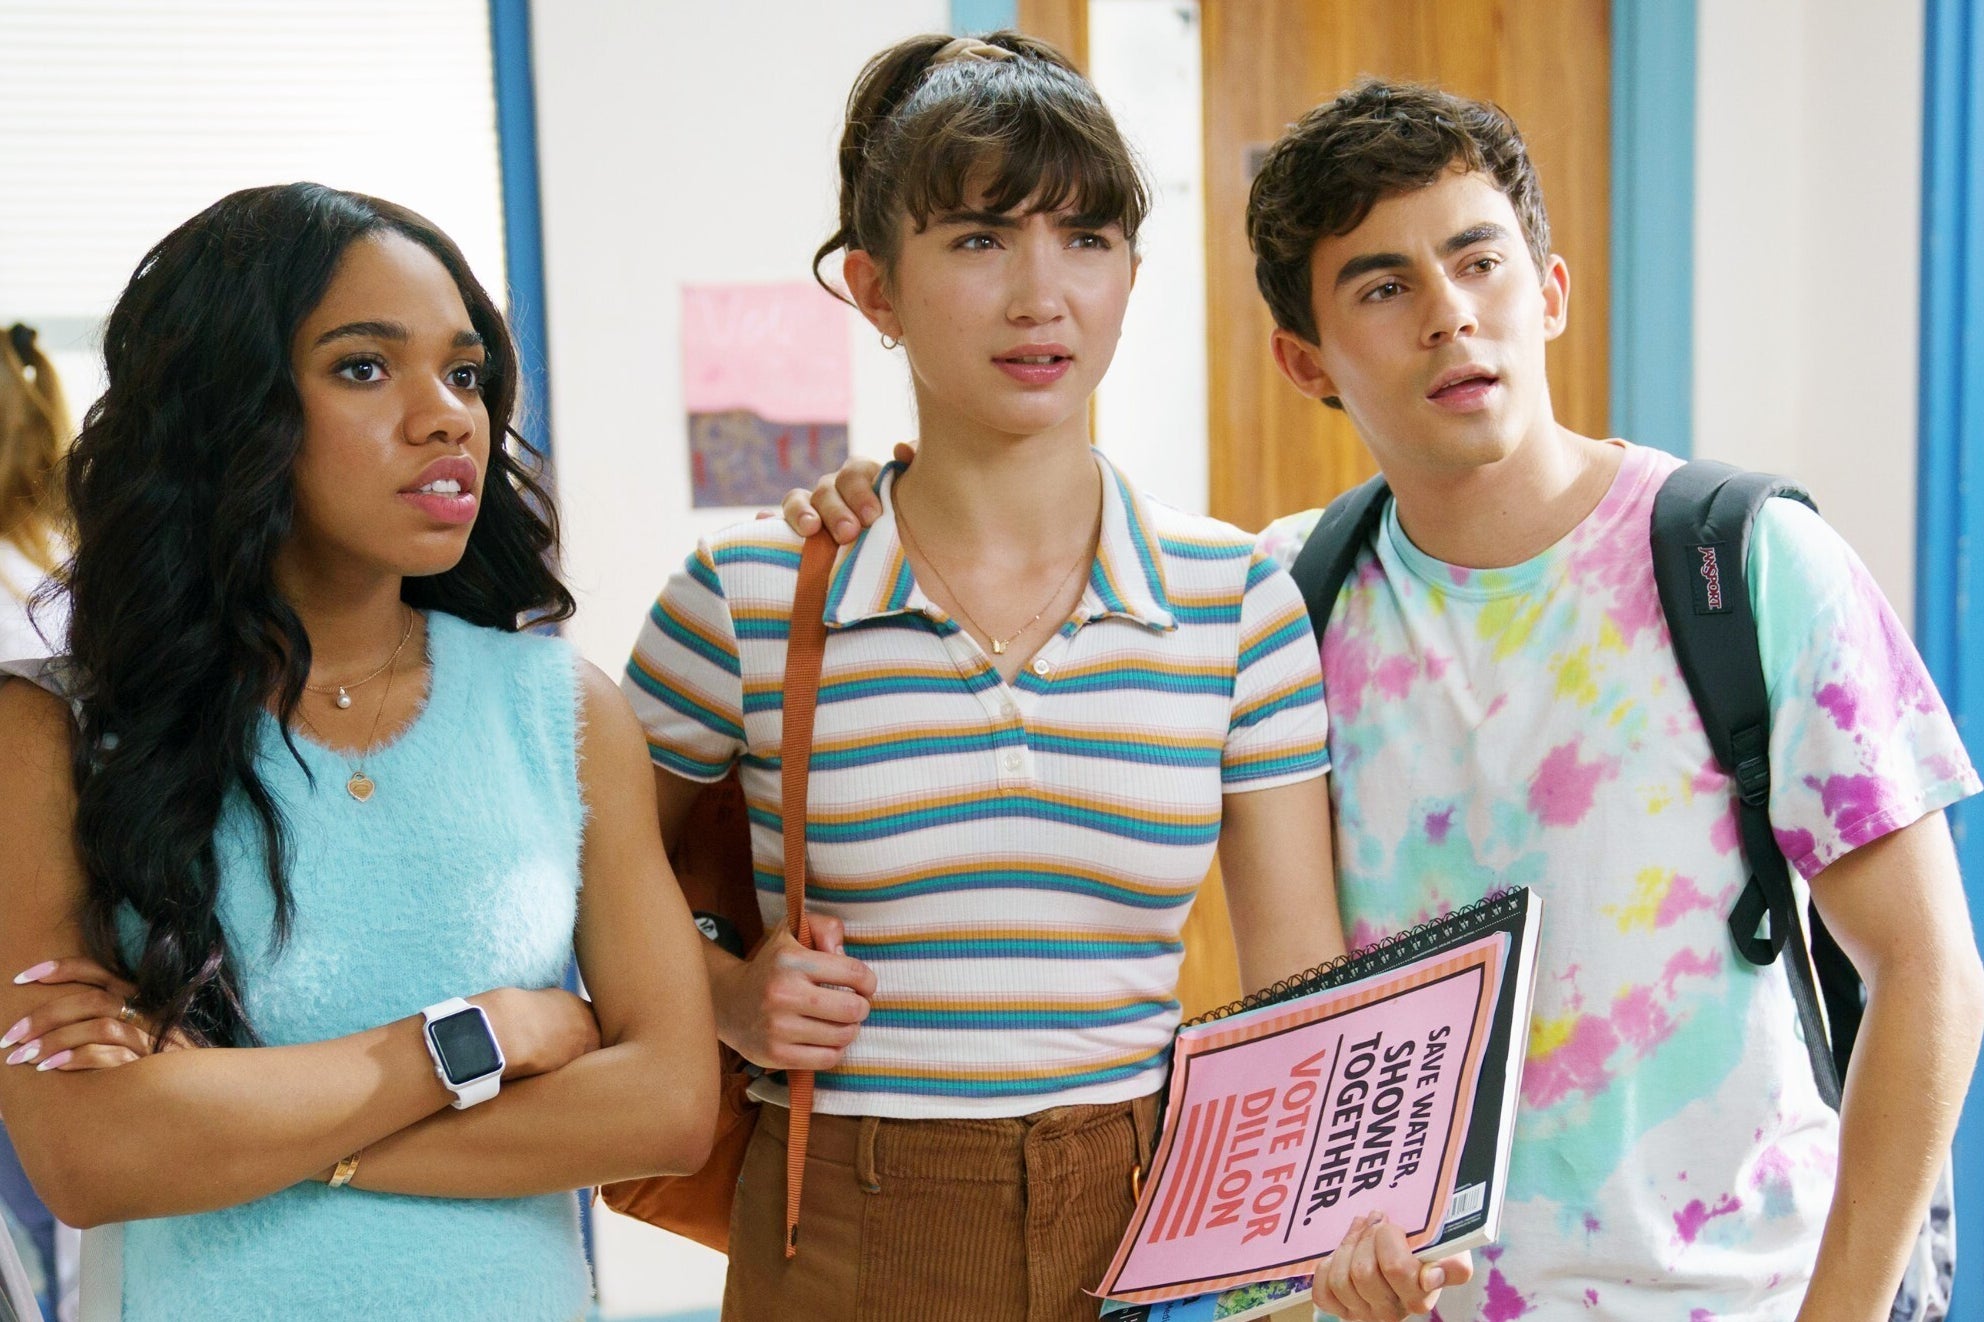 Here's Rowan Blanchard And The Rest Of The "Crush" Cast On Instagram thumbnail